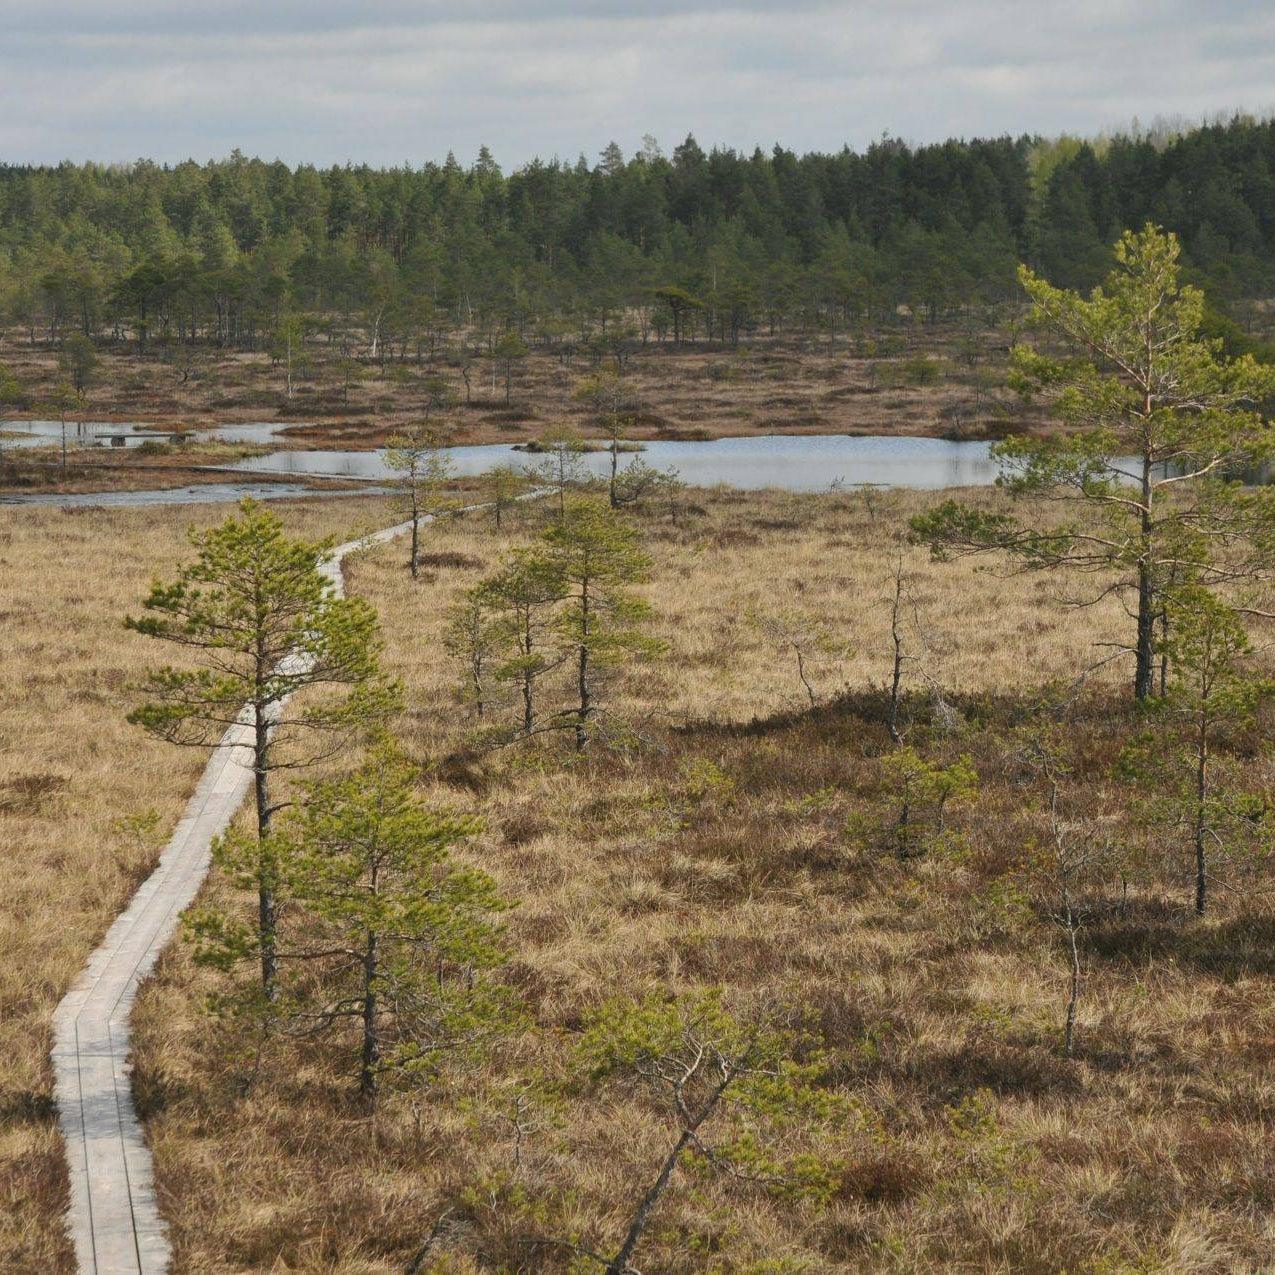 11 facts about peat bogs - for peat's sake